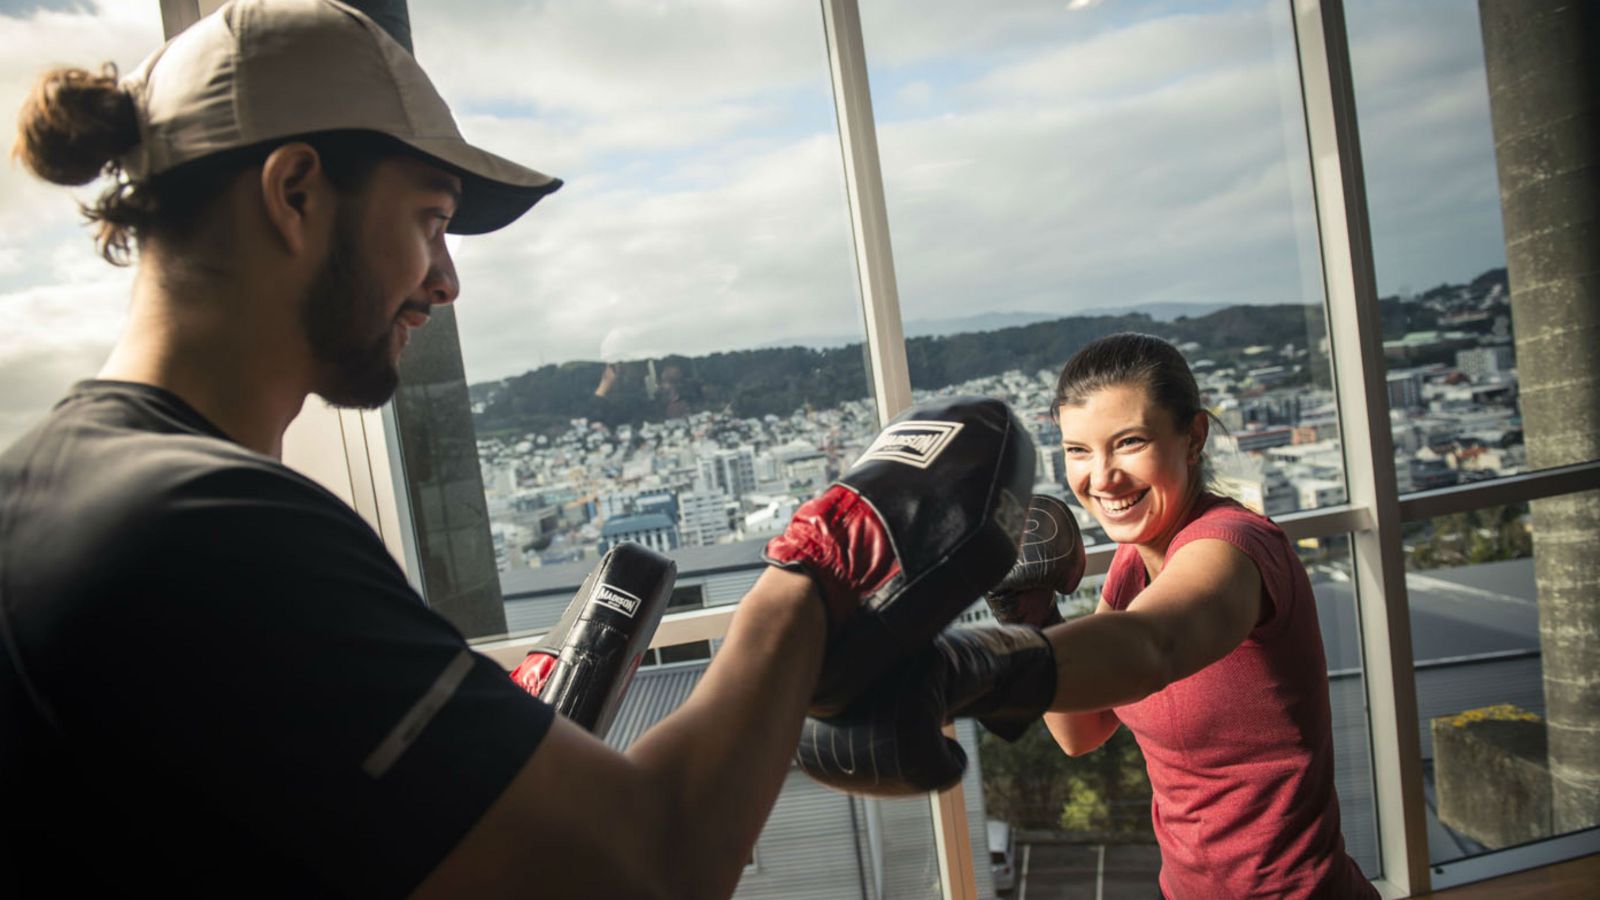 A female student with boxing gloves, punches practice targets held up by a male instructor.